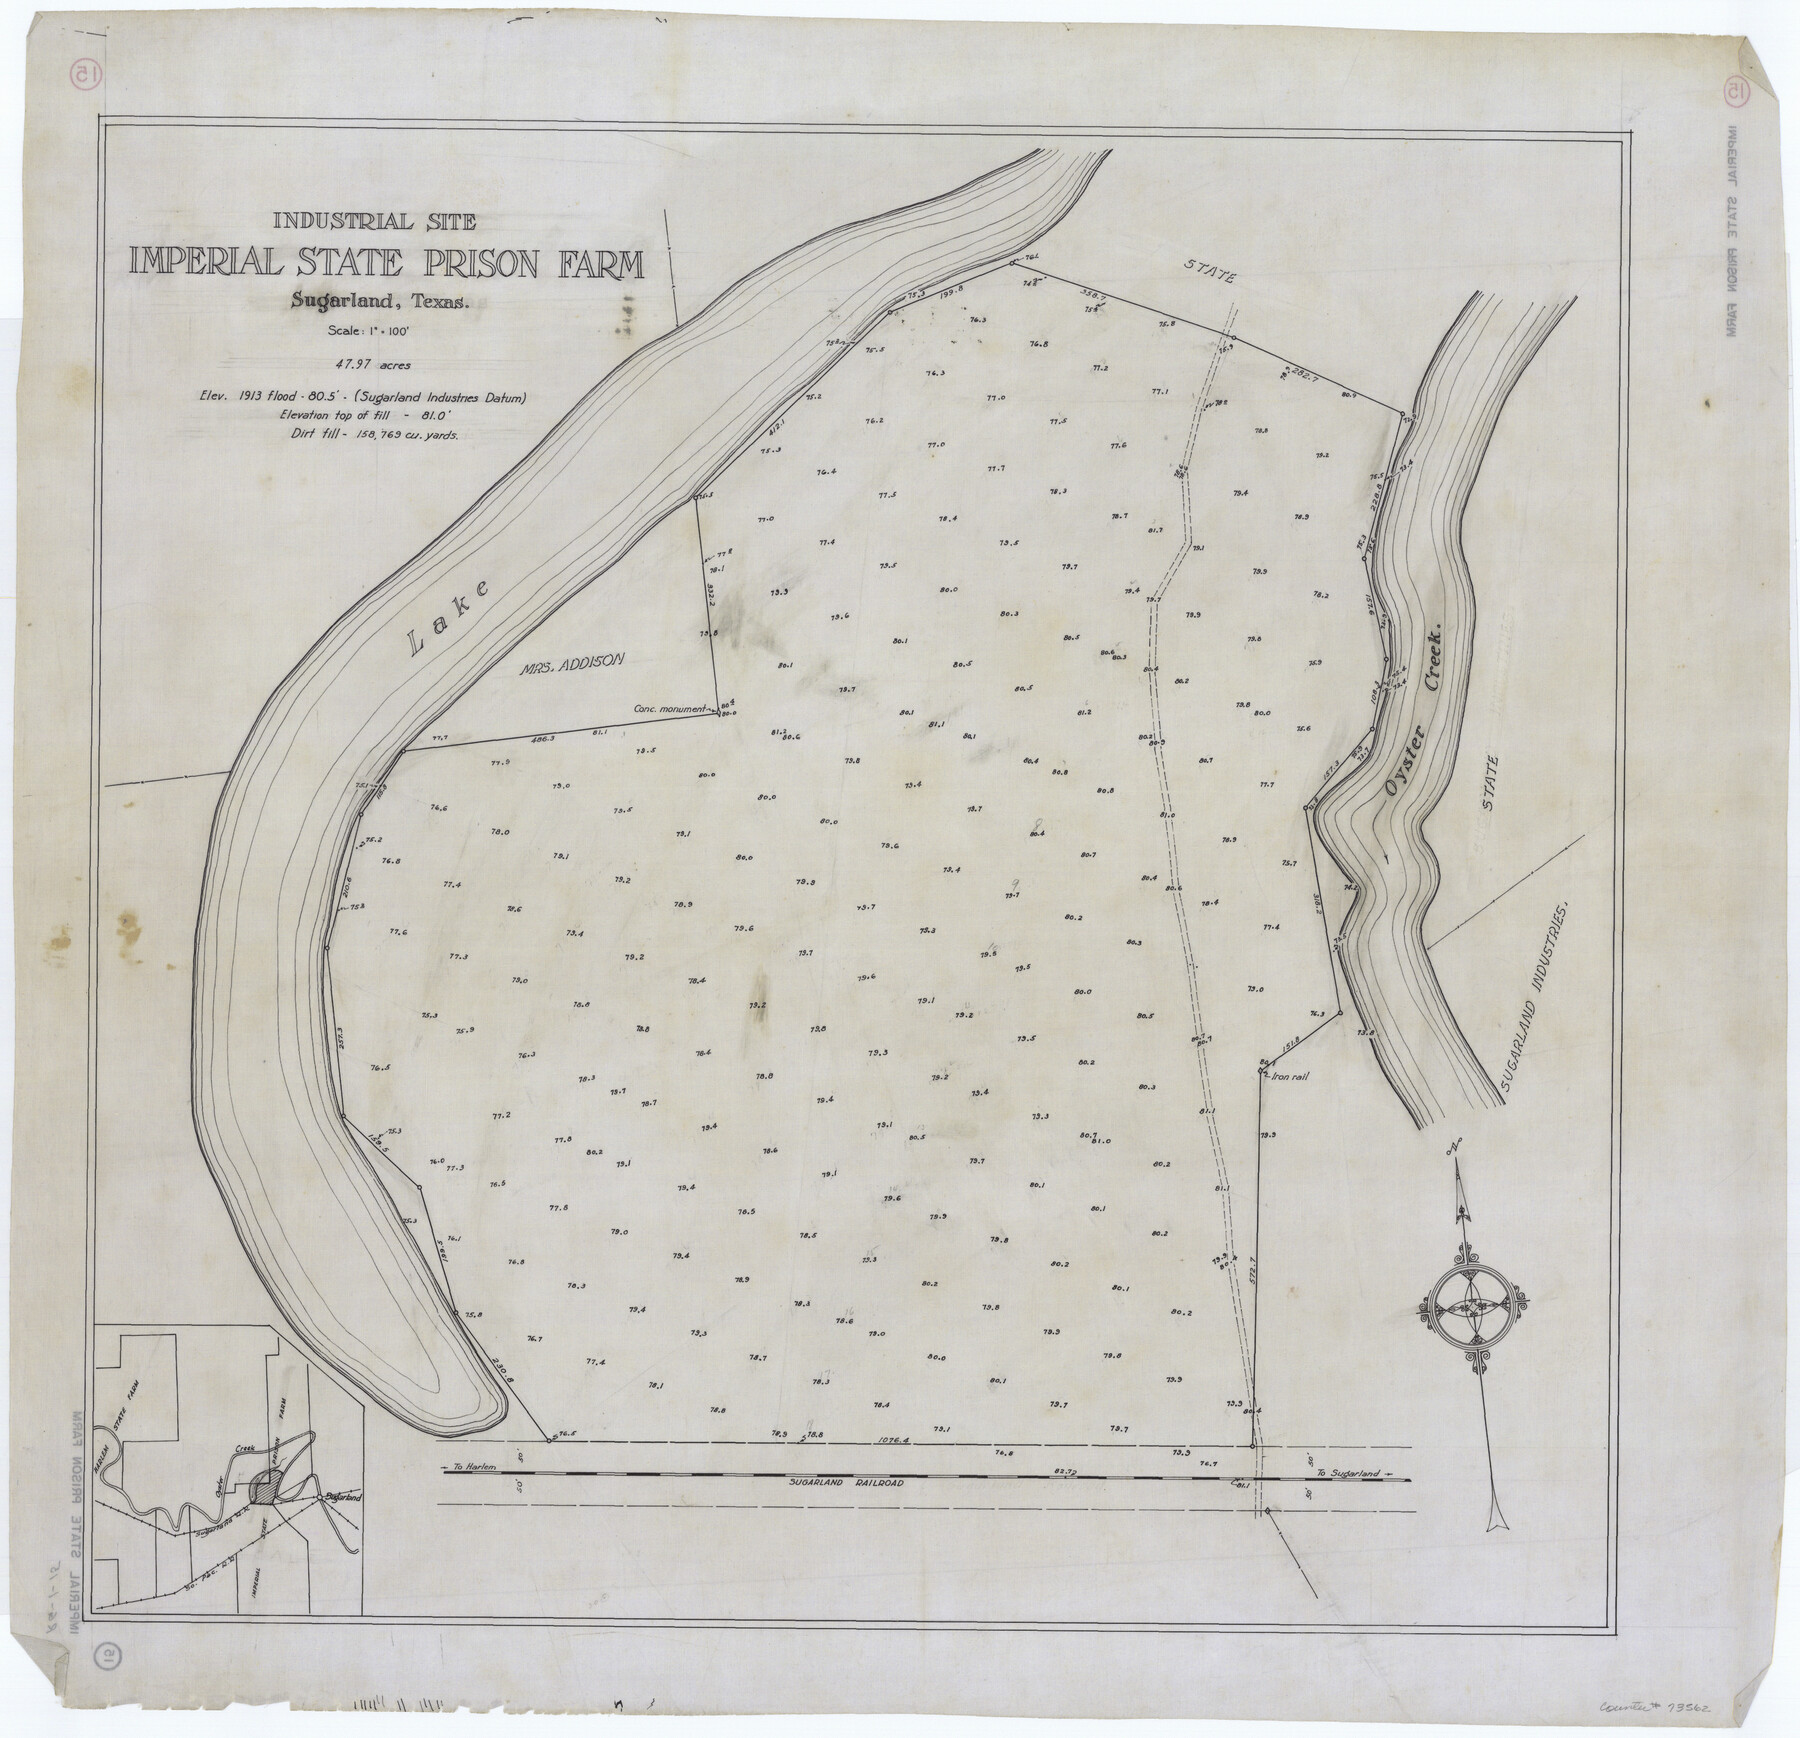 73562, Industrial Site, Imperial State Prison Farm, Sugarland, Texas, General Map Collection